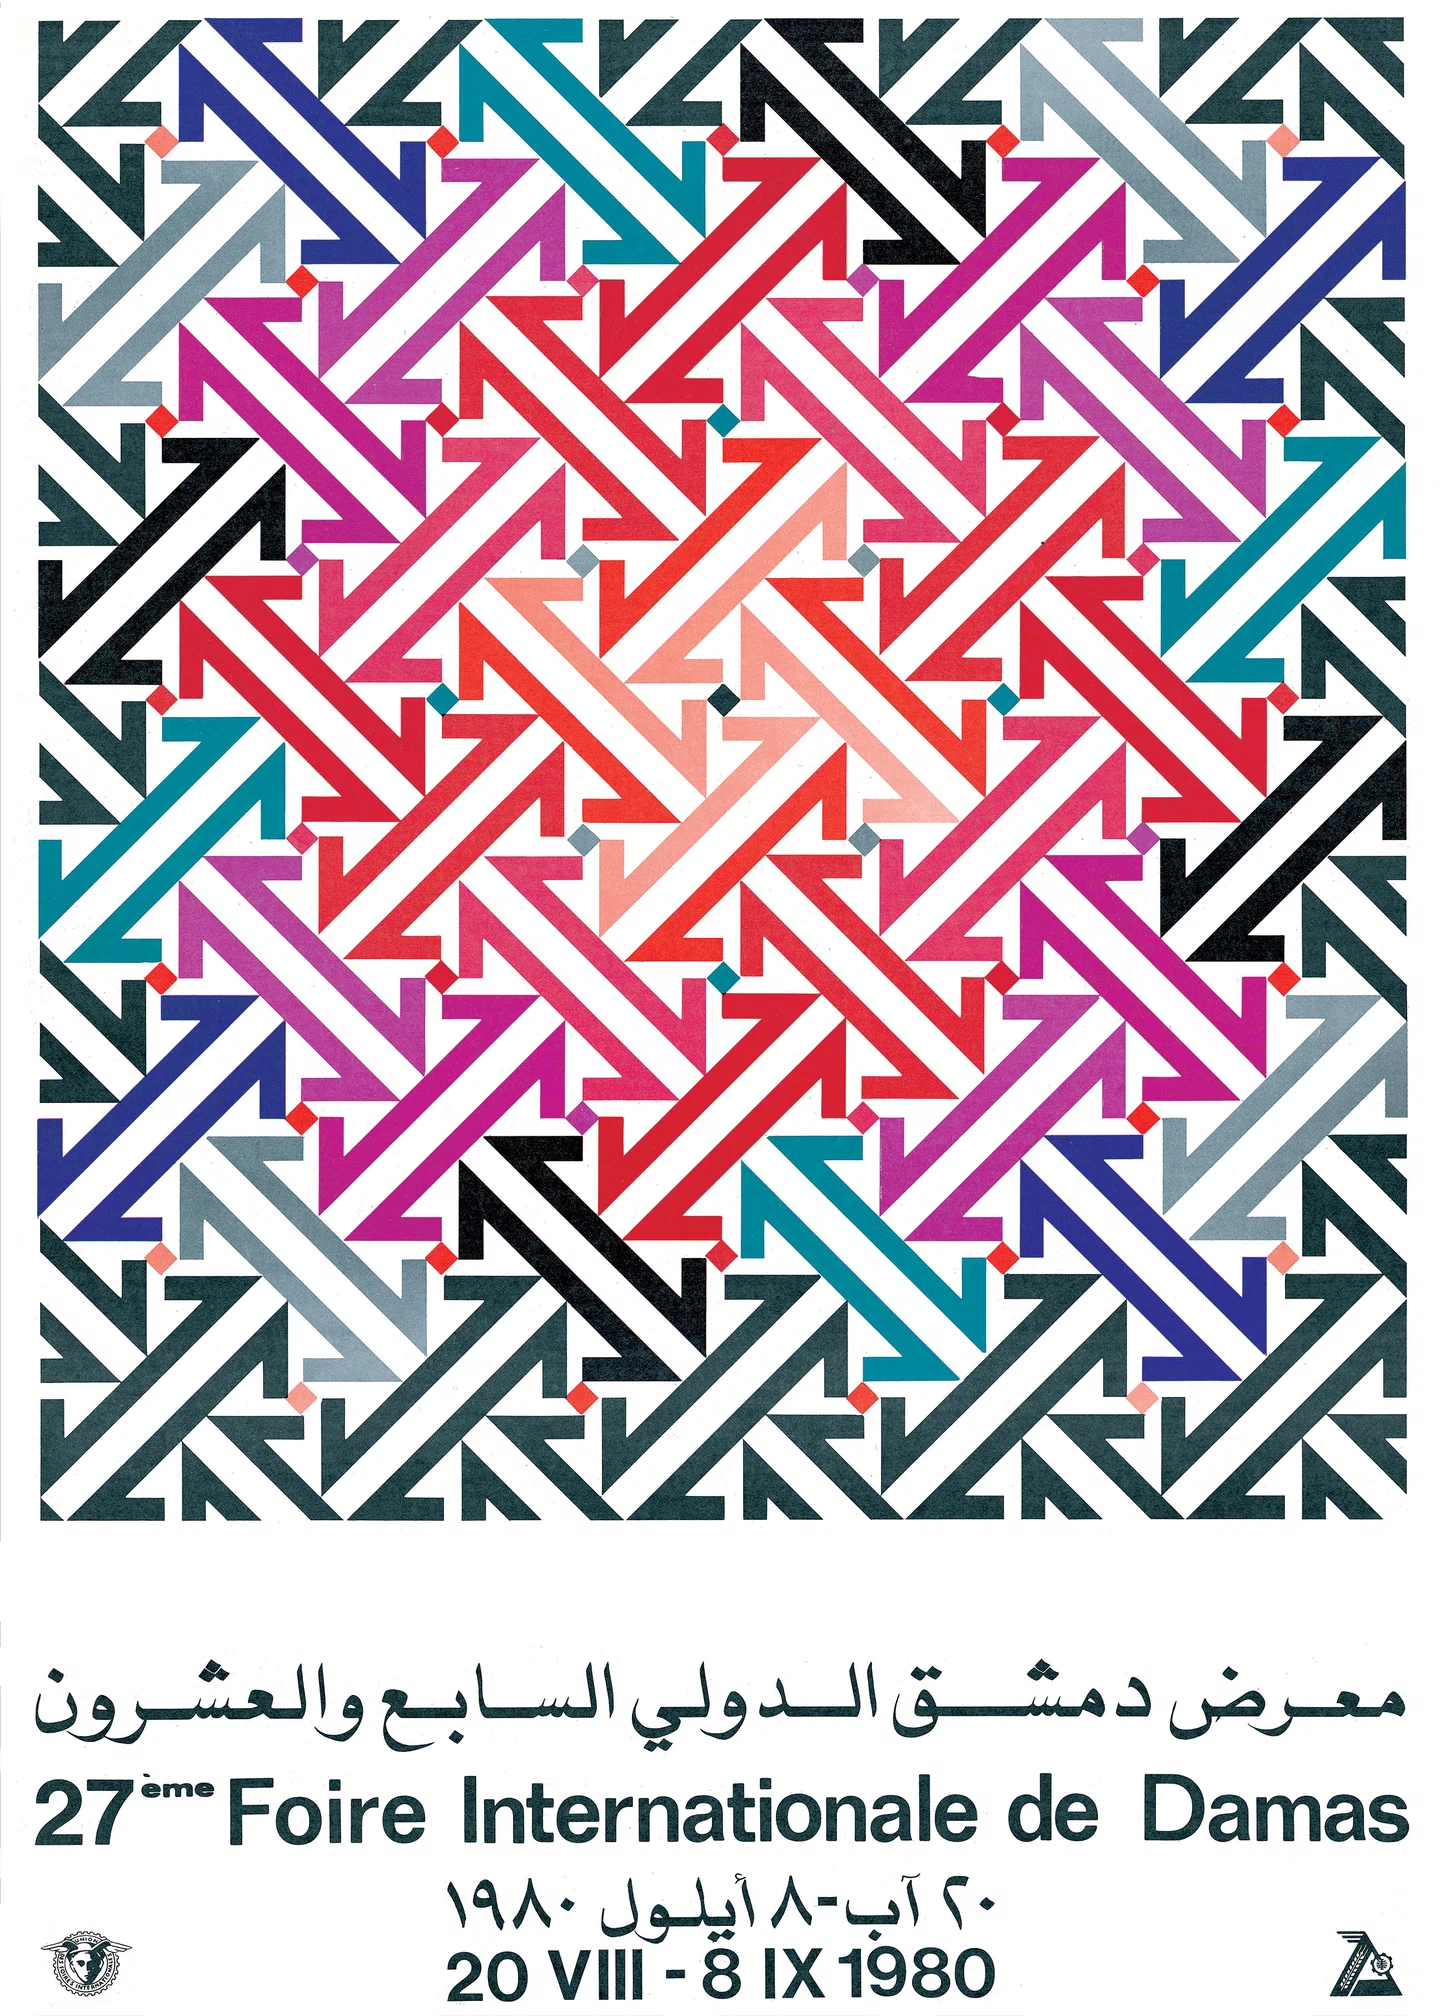 syrian-print-archive-features-graphic-design-itsnicethat-7.jpg